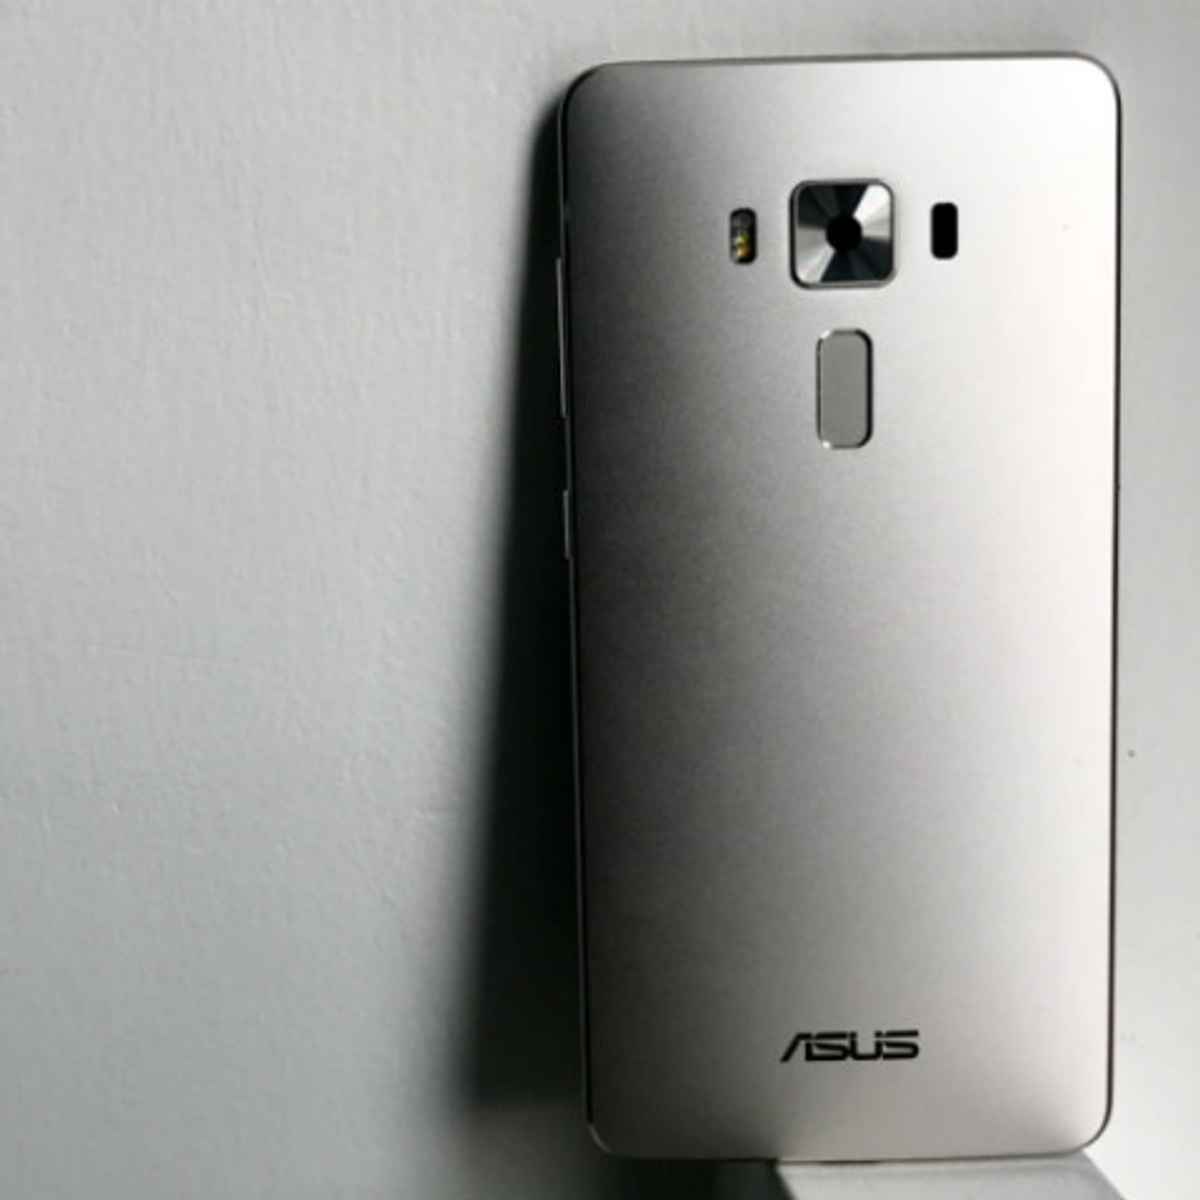 Asus Zenfone 3 Deluxe Zs570kl Review Not The Premium Phone You Are Looking For